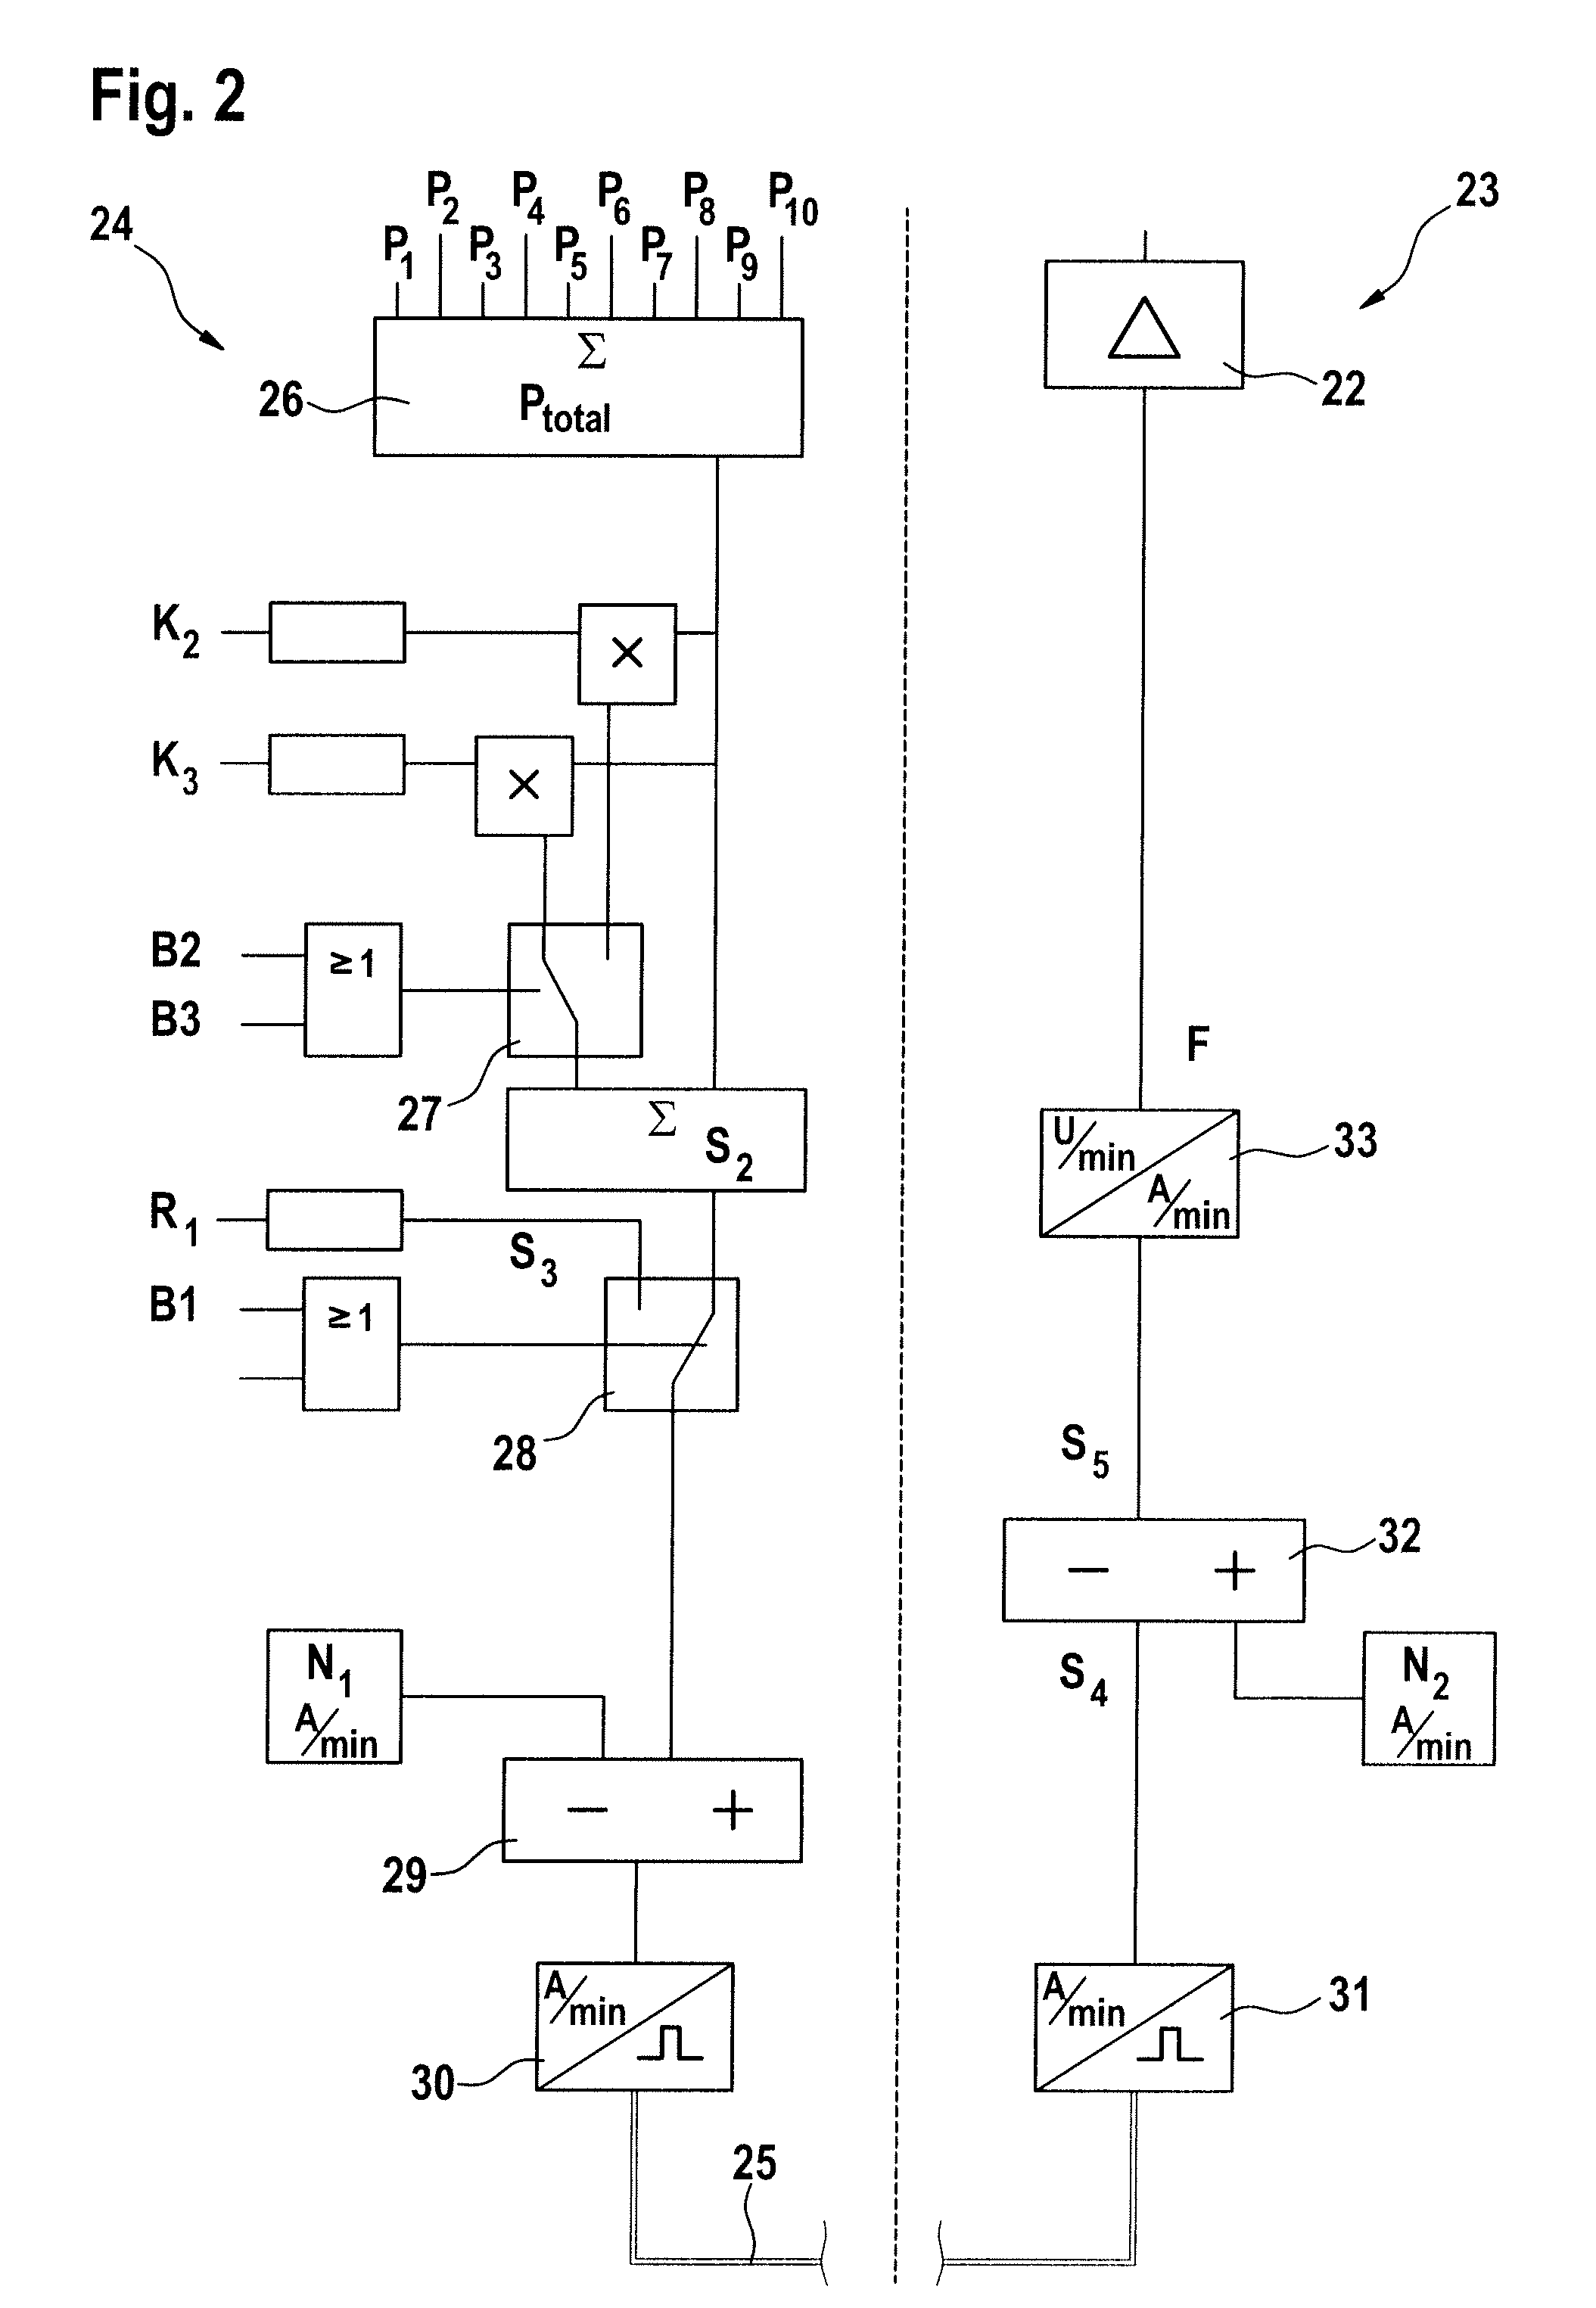 Method for regulating a conveying stream composed of articles of the tobacco-processing industry between a tray discharger and a feed device with multiple feed units